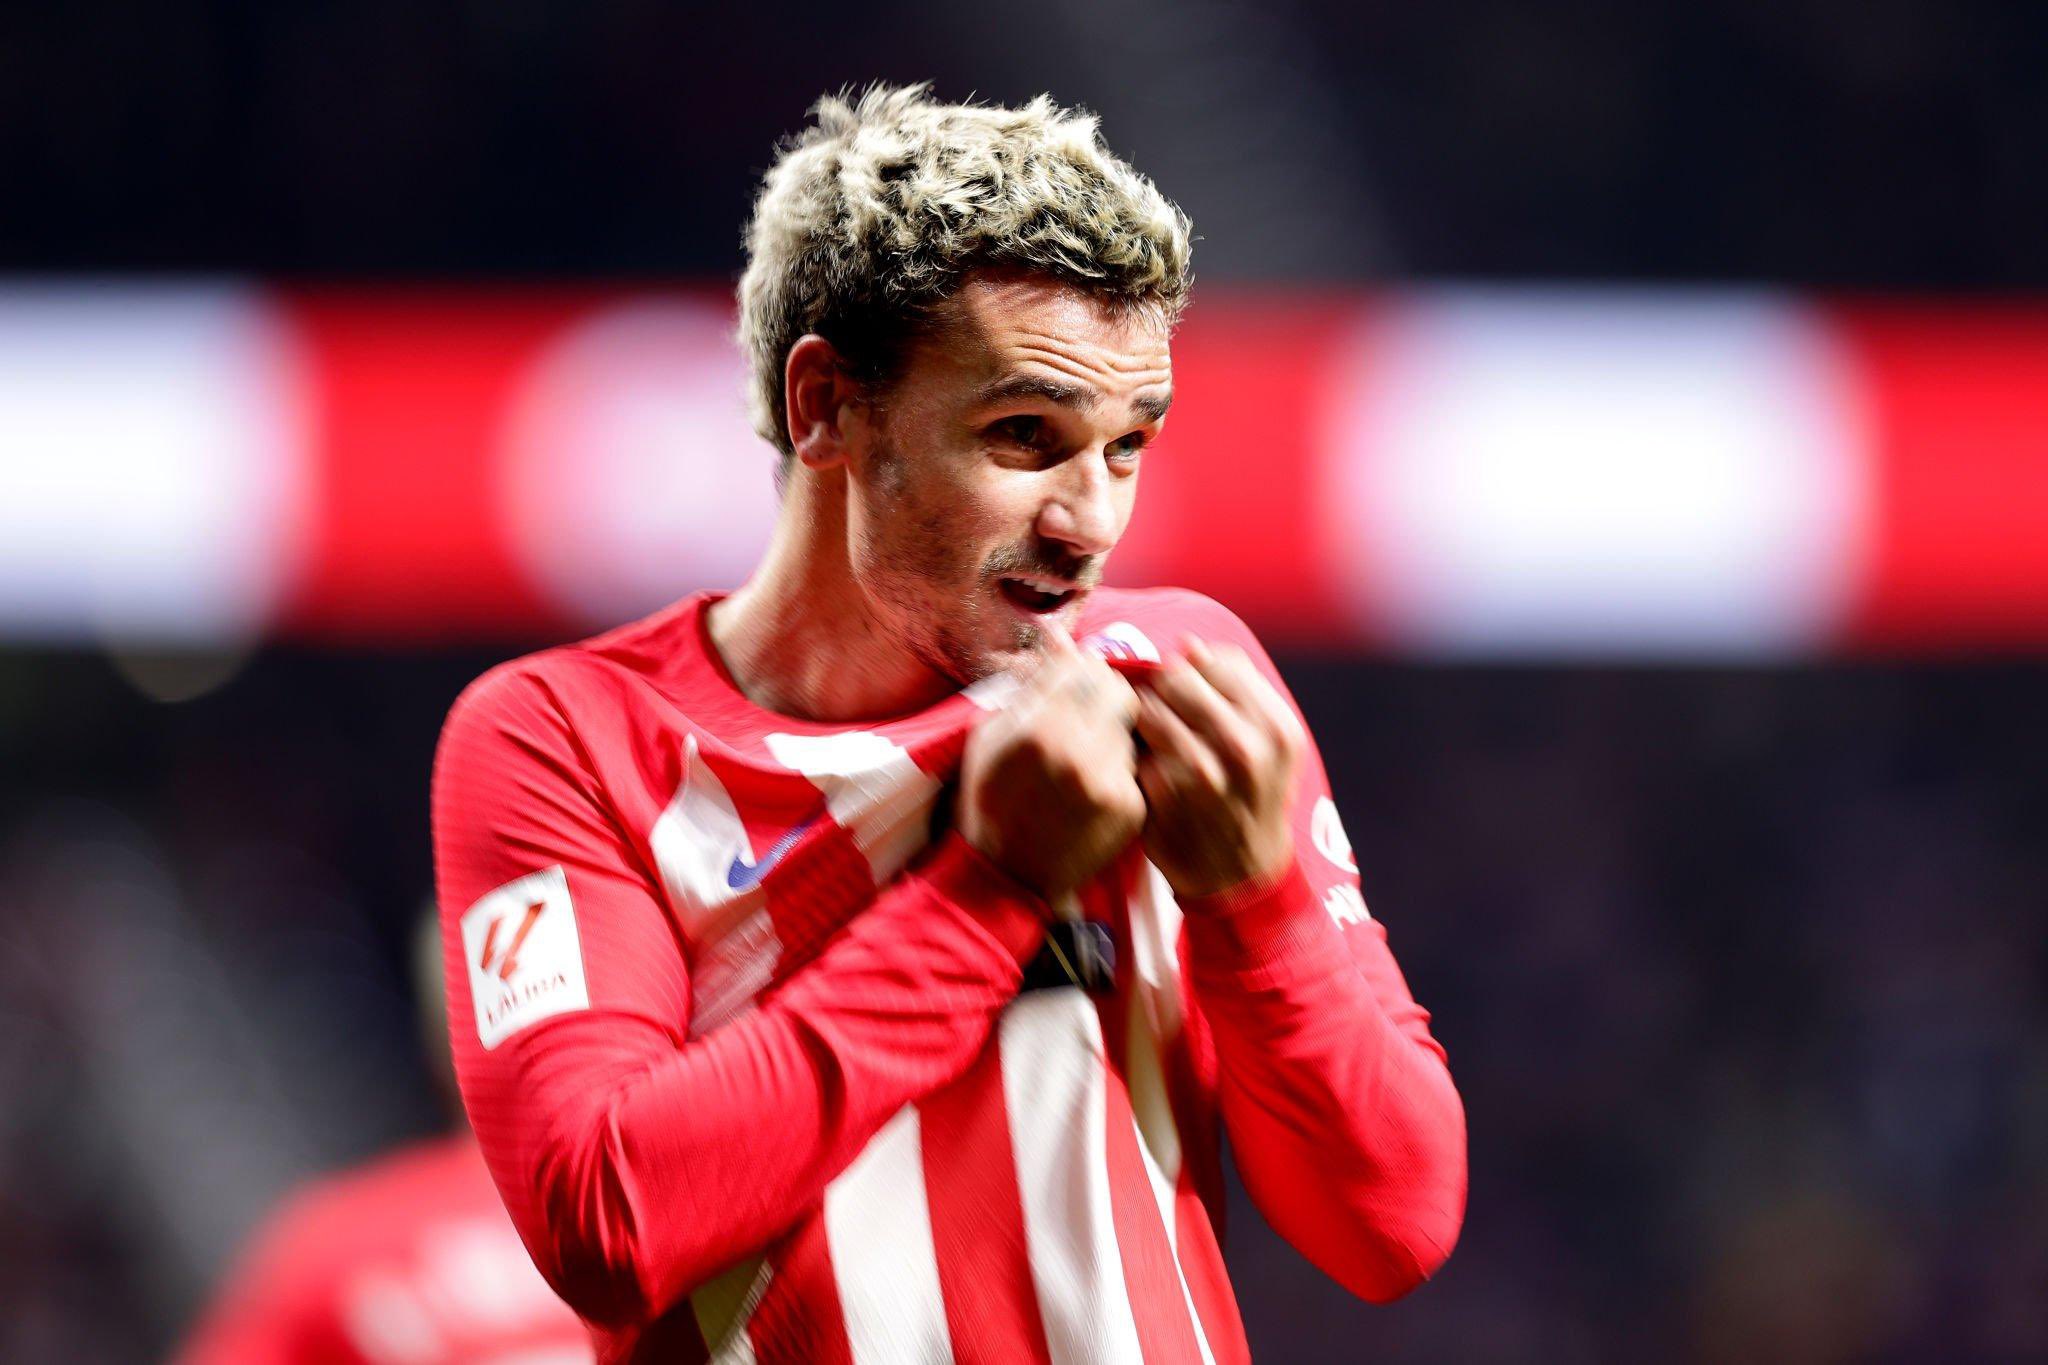 Atletico Madrid open contract renewal talks with Antoine Griezmann